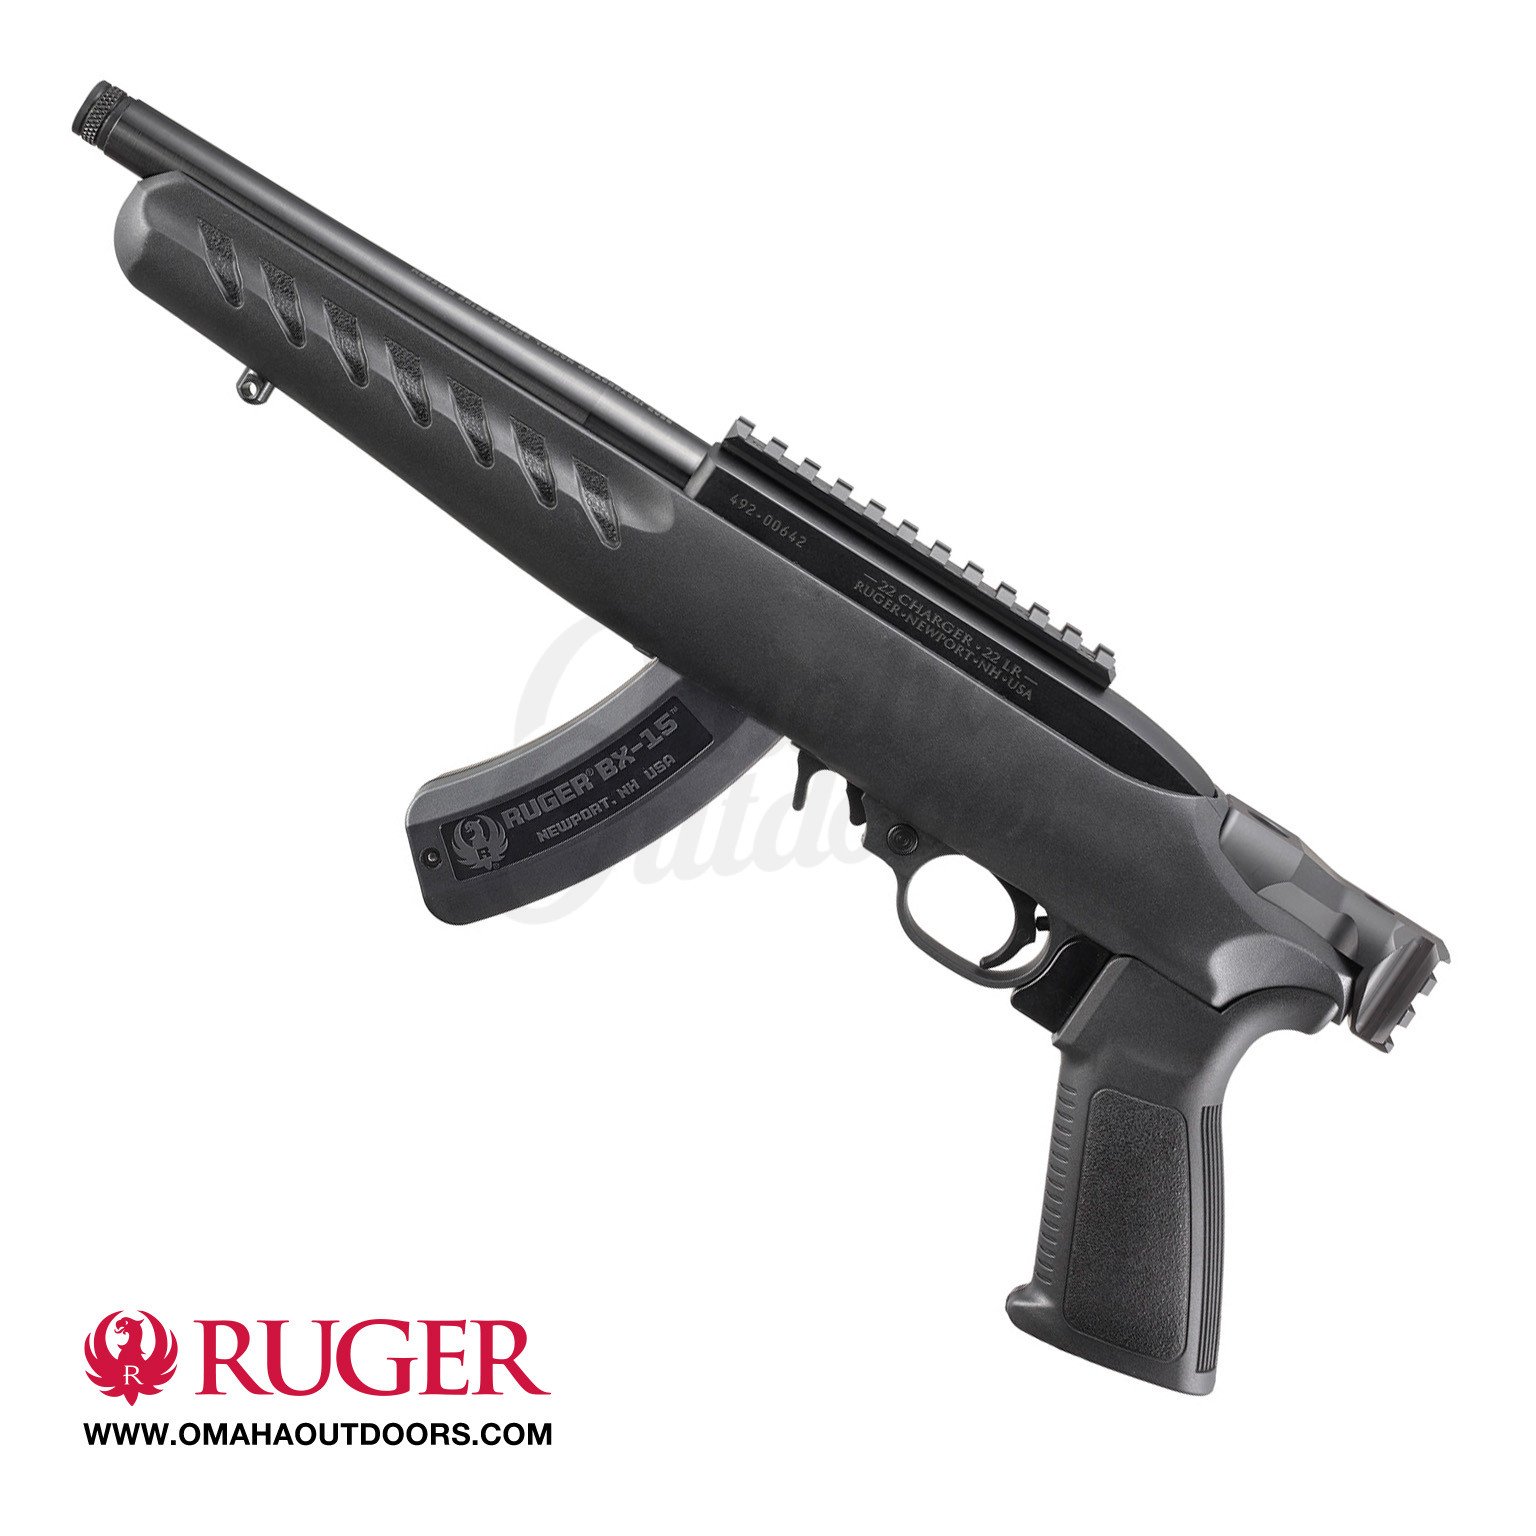 Ruger 22 Charger With Picatinny Rail Brace Mount 22lr In Stock